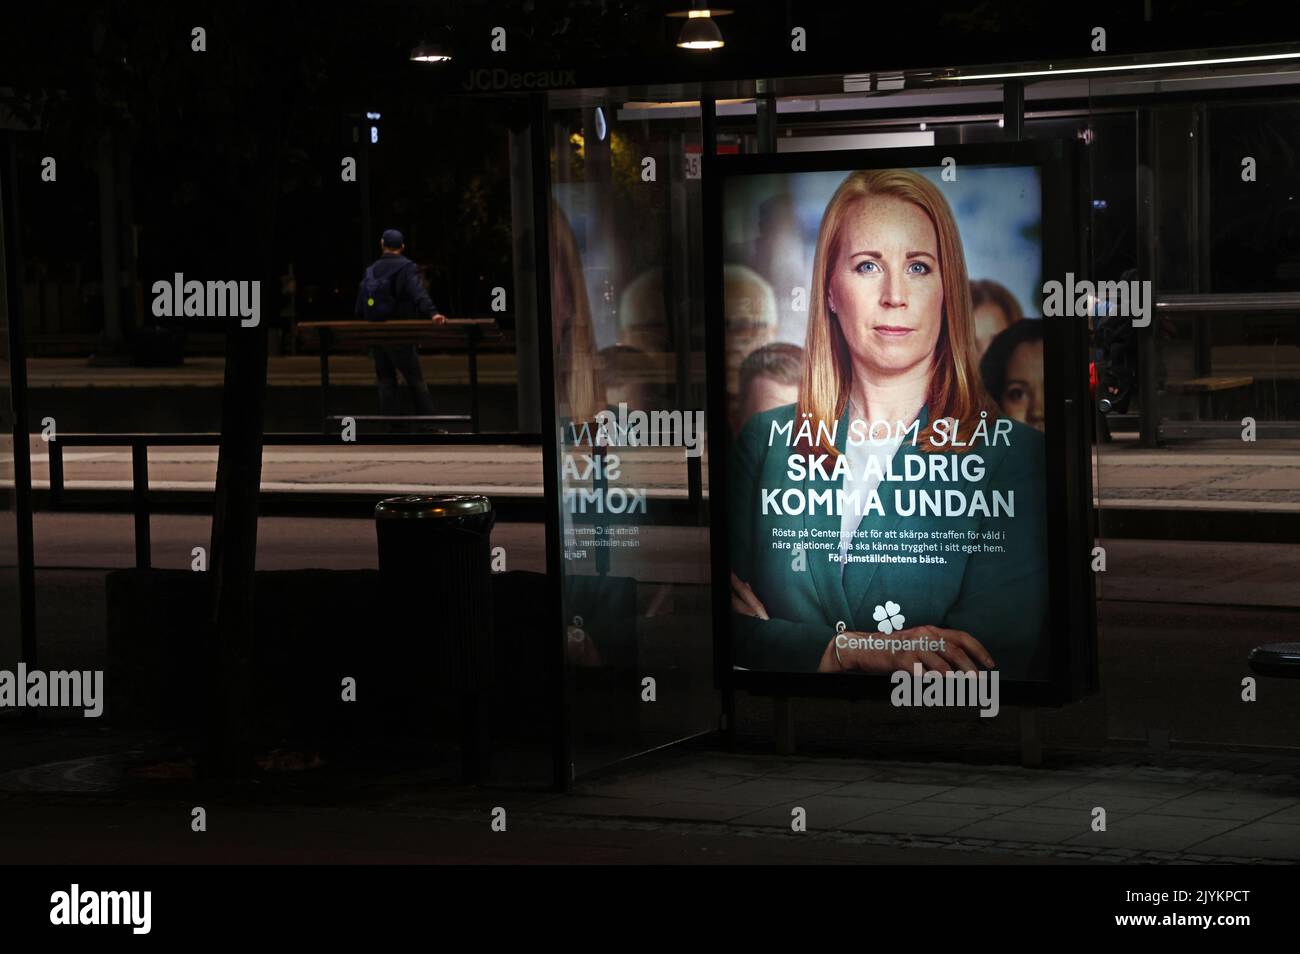 The Swedish parliamentary election takes place on Sunday, September 11. Here you can see election advertising, at a bus station, from different political parties. In the picture: The Centre Party's (In Swedish: Centerpartiet) party leader Annie Lööf. Stock Photo